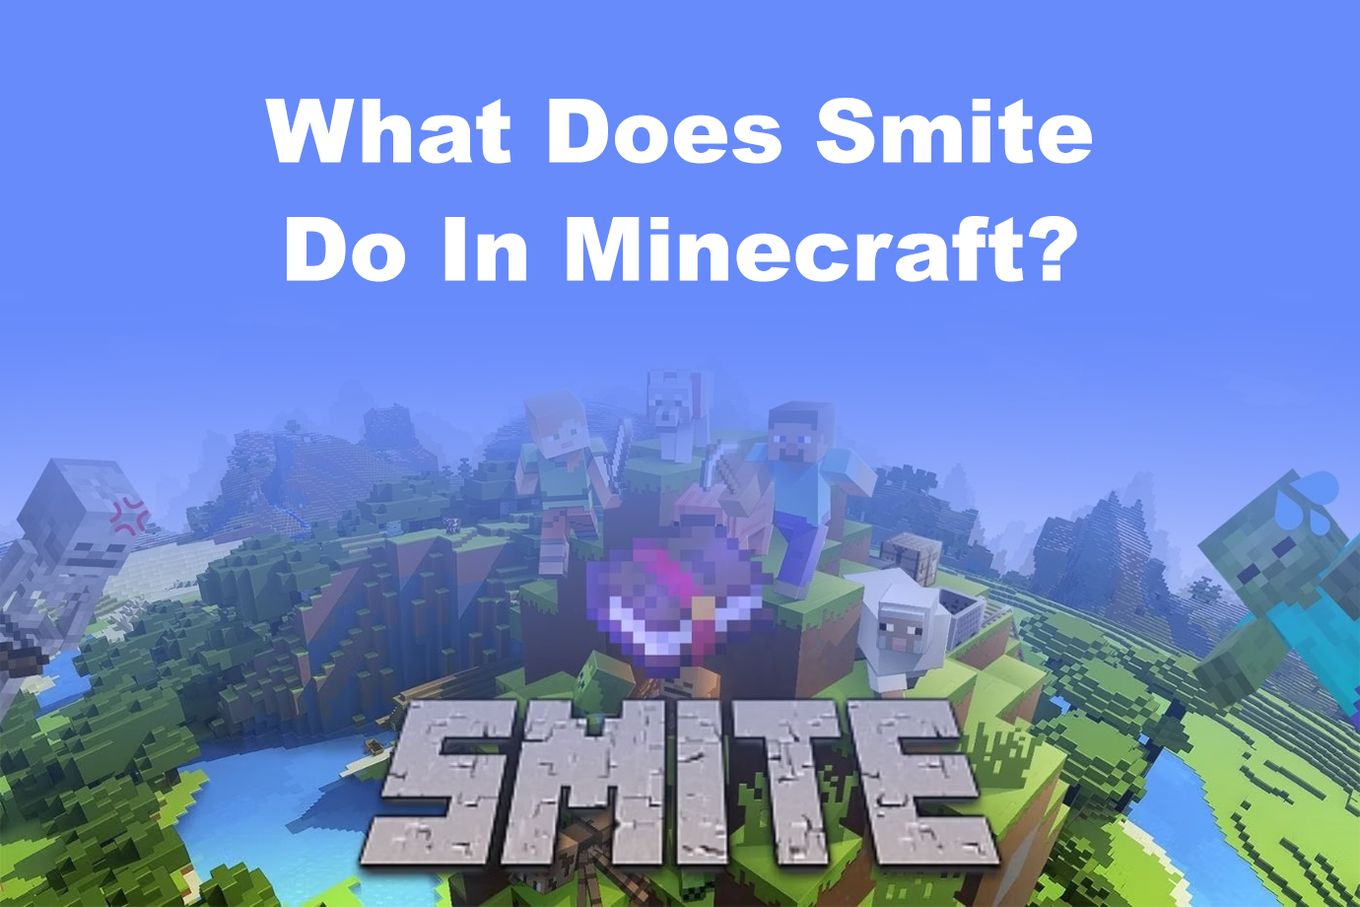 What Does Smite do in Minecraft?